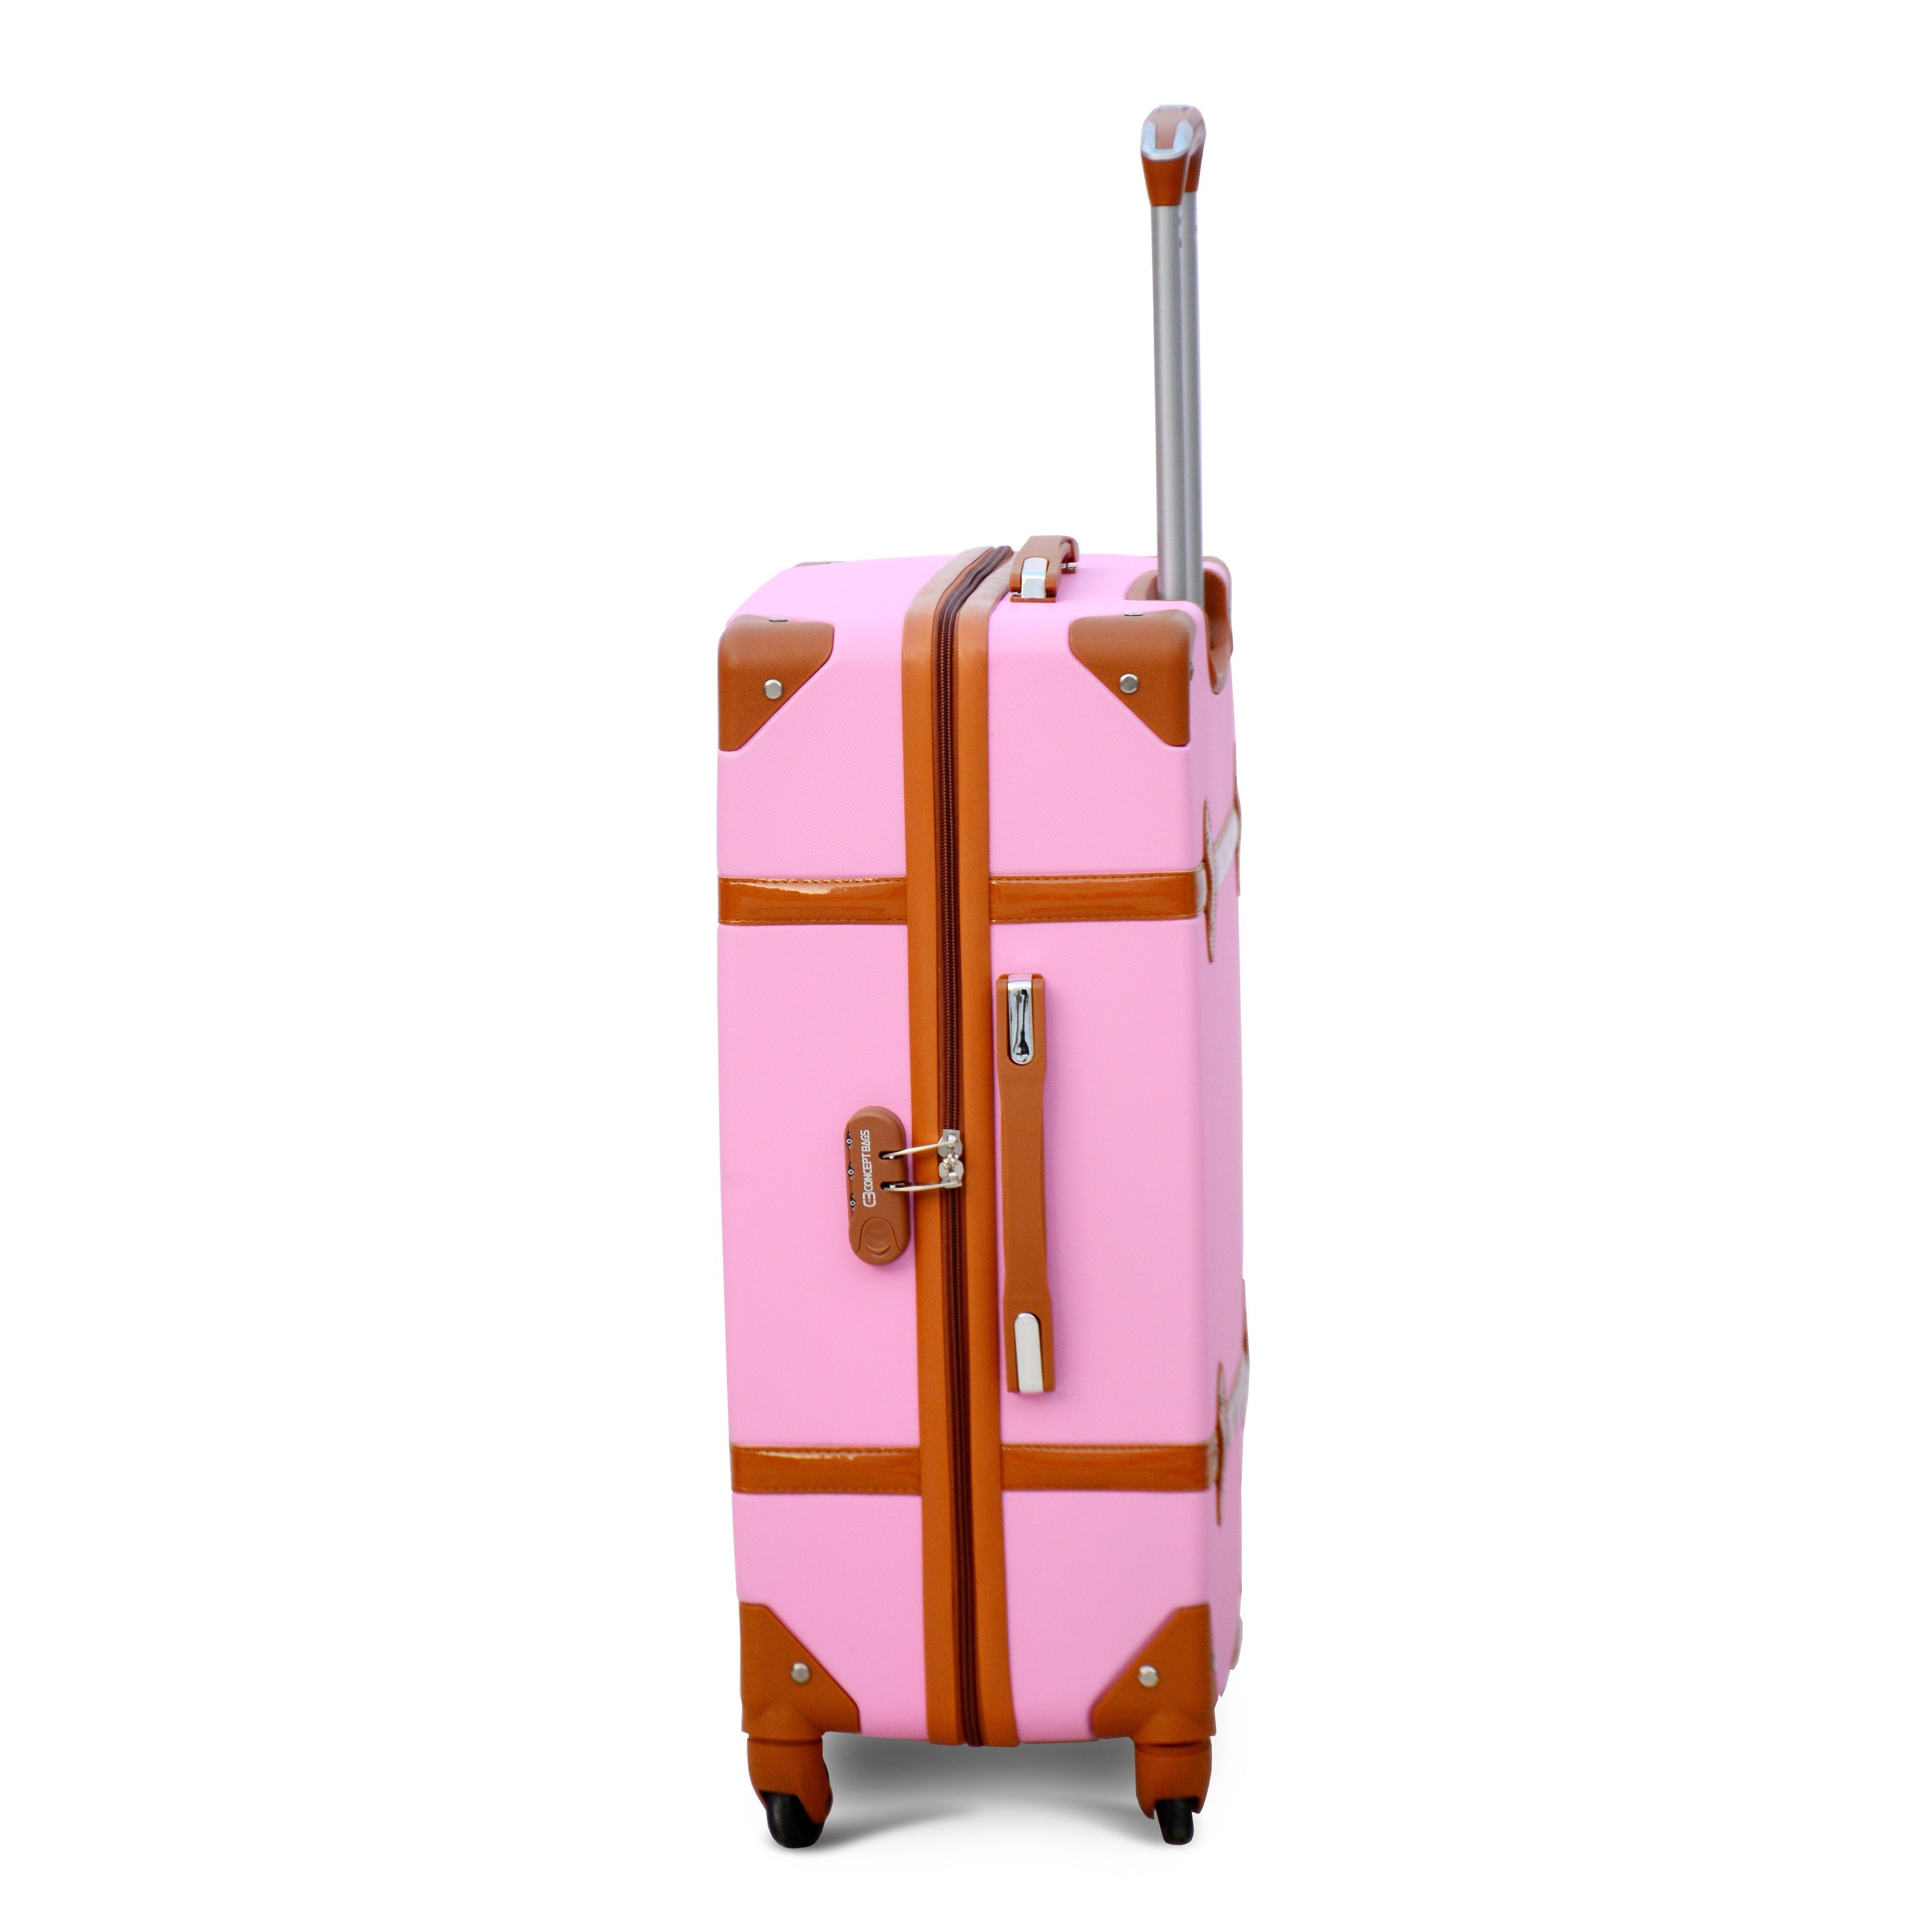 4 Pcs Set 7” 20” 24” 28 Inches Corner Guard Lightweight ABS Pink and Brown Luggage Bag